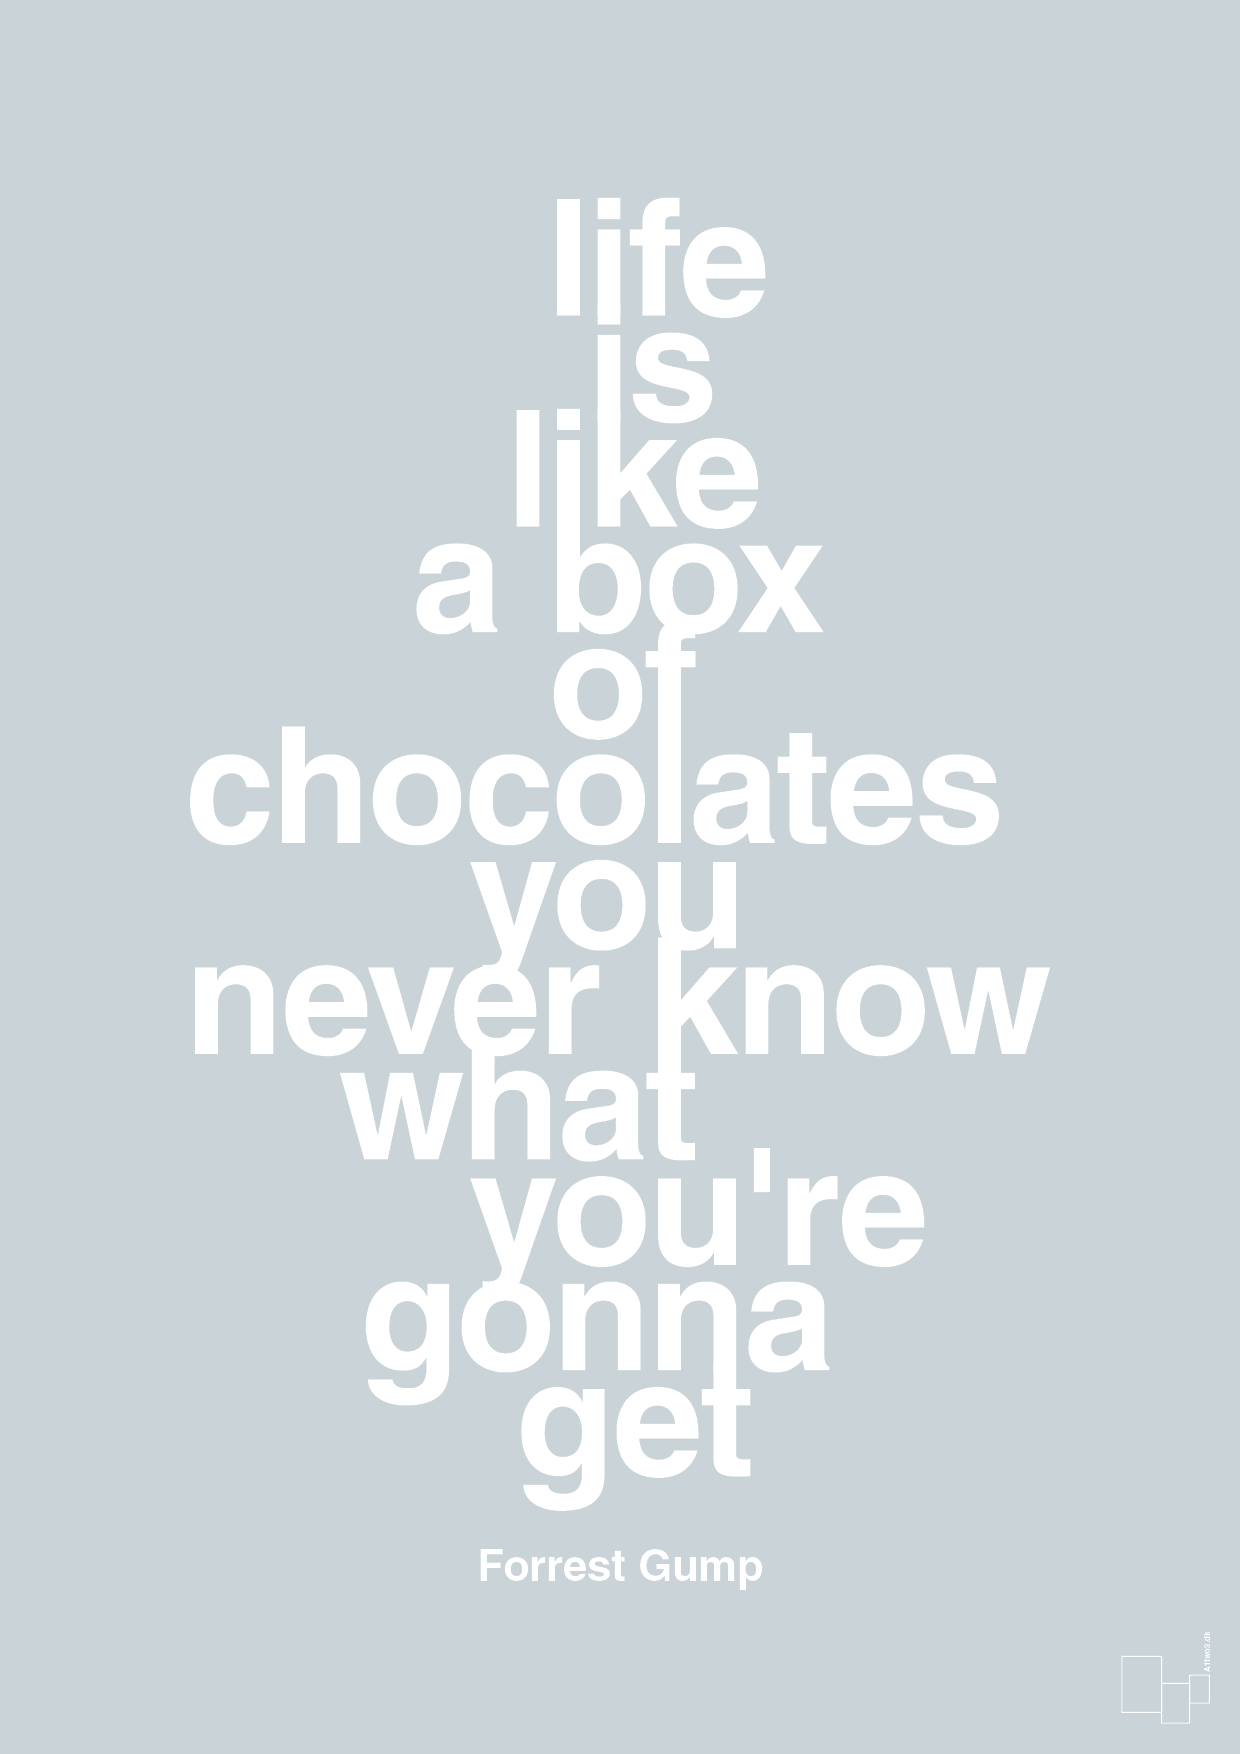 life is like a box of chocolates you never know what you're gonna get - Plakat med Citater i Light Drizzle